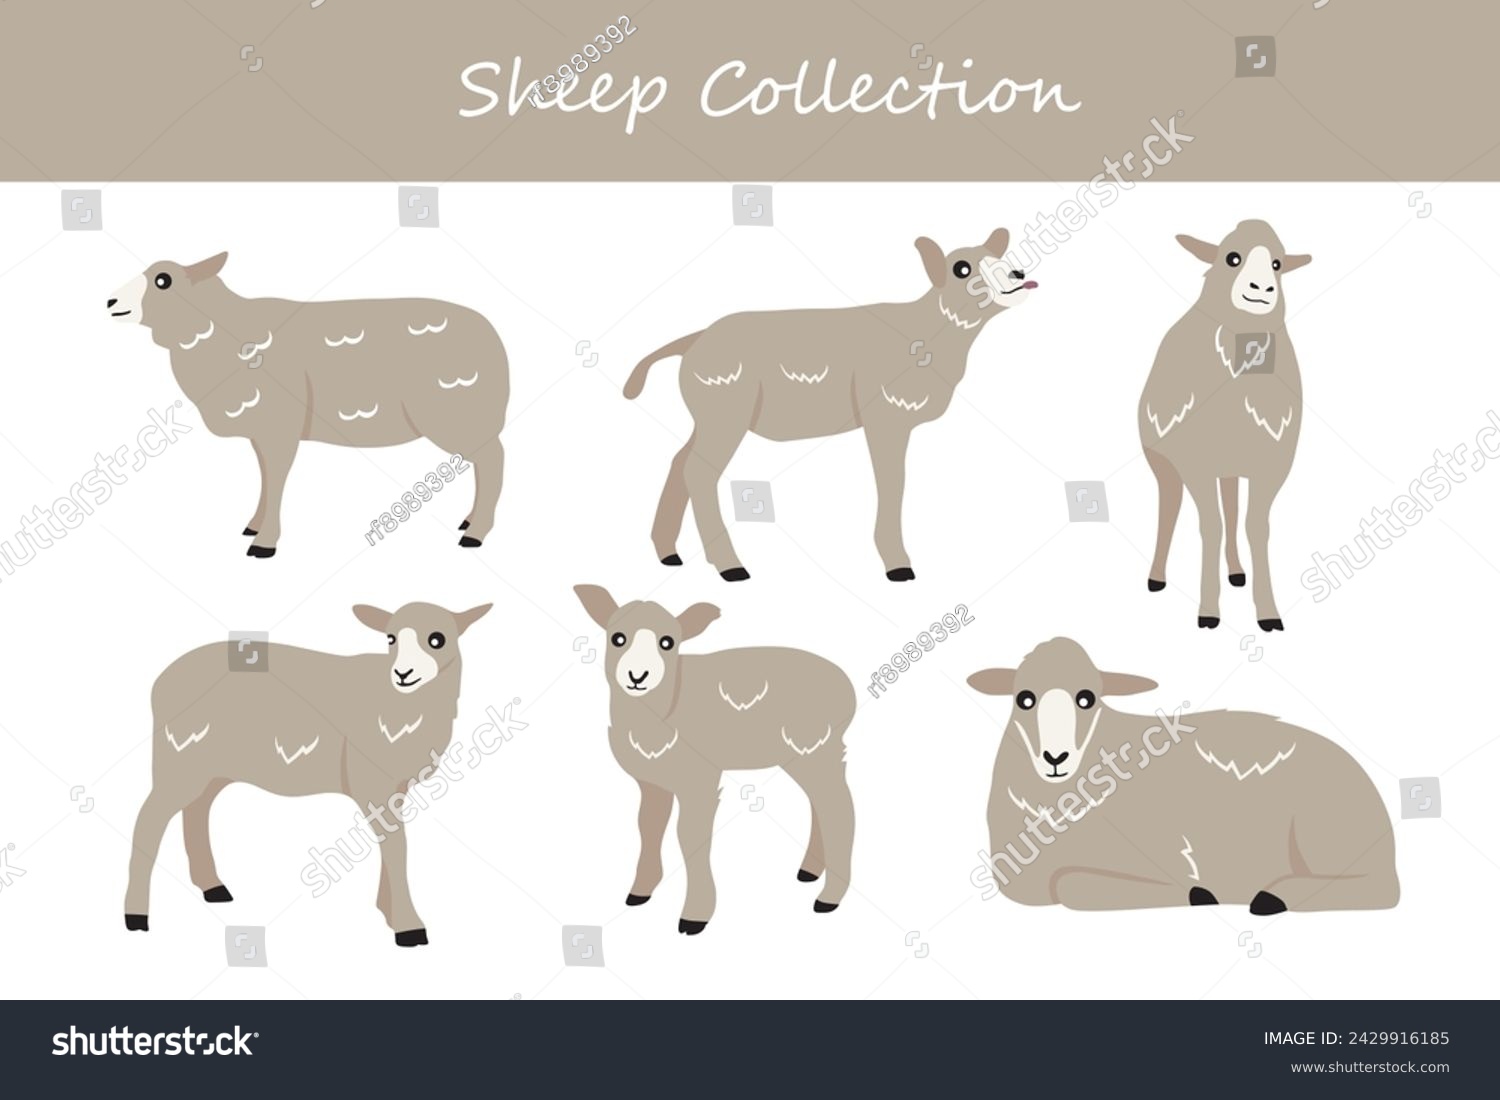 SVG of Sheep collection. Cute cartoon sheep. Vector illustration isolated on white background. svg